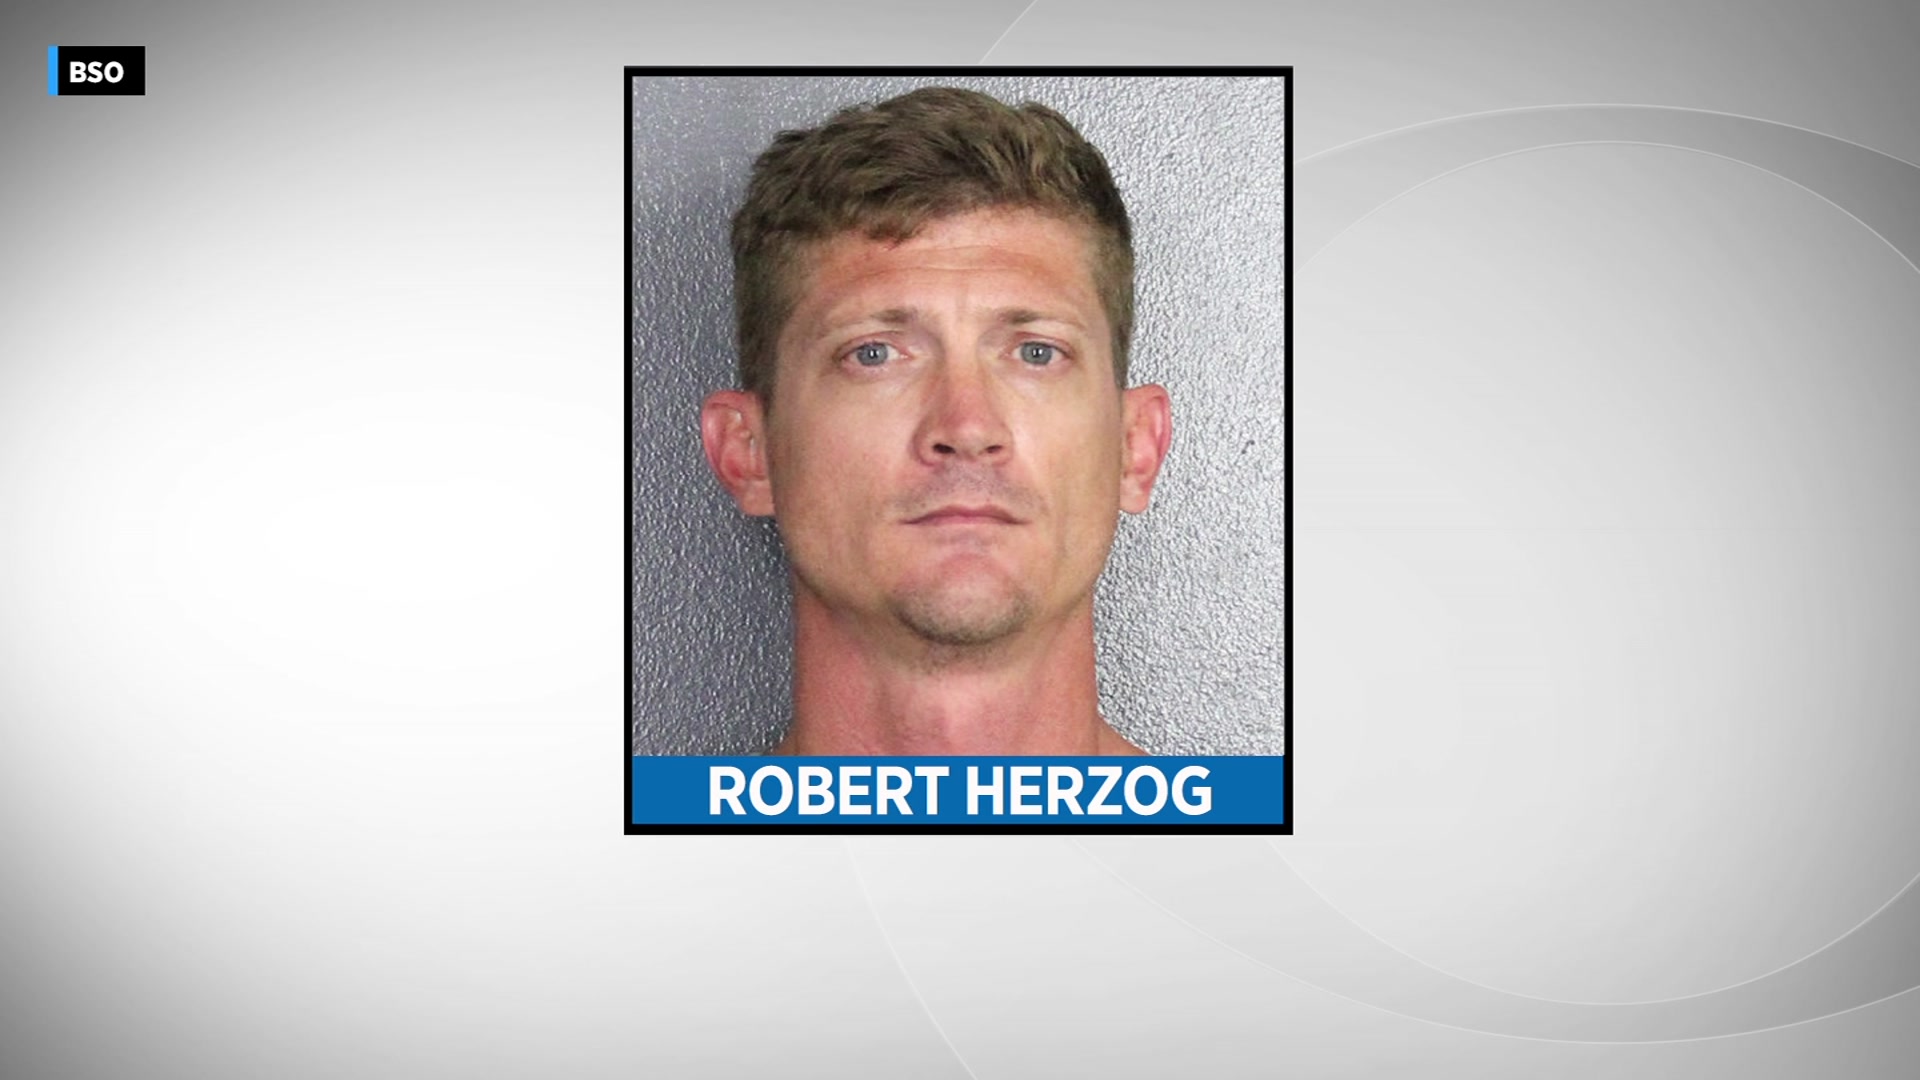 Broward High School Assistant Principal Robert Herzog Accused Of Illegally Obtaining Personal Information